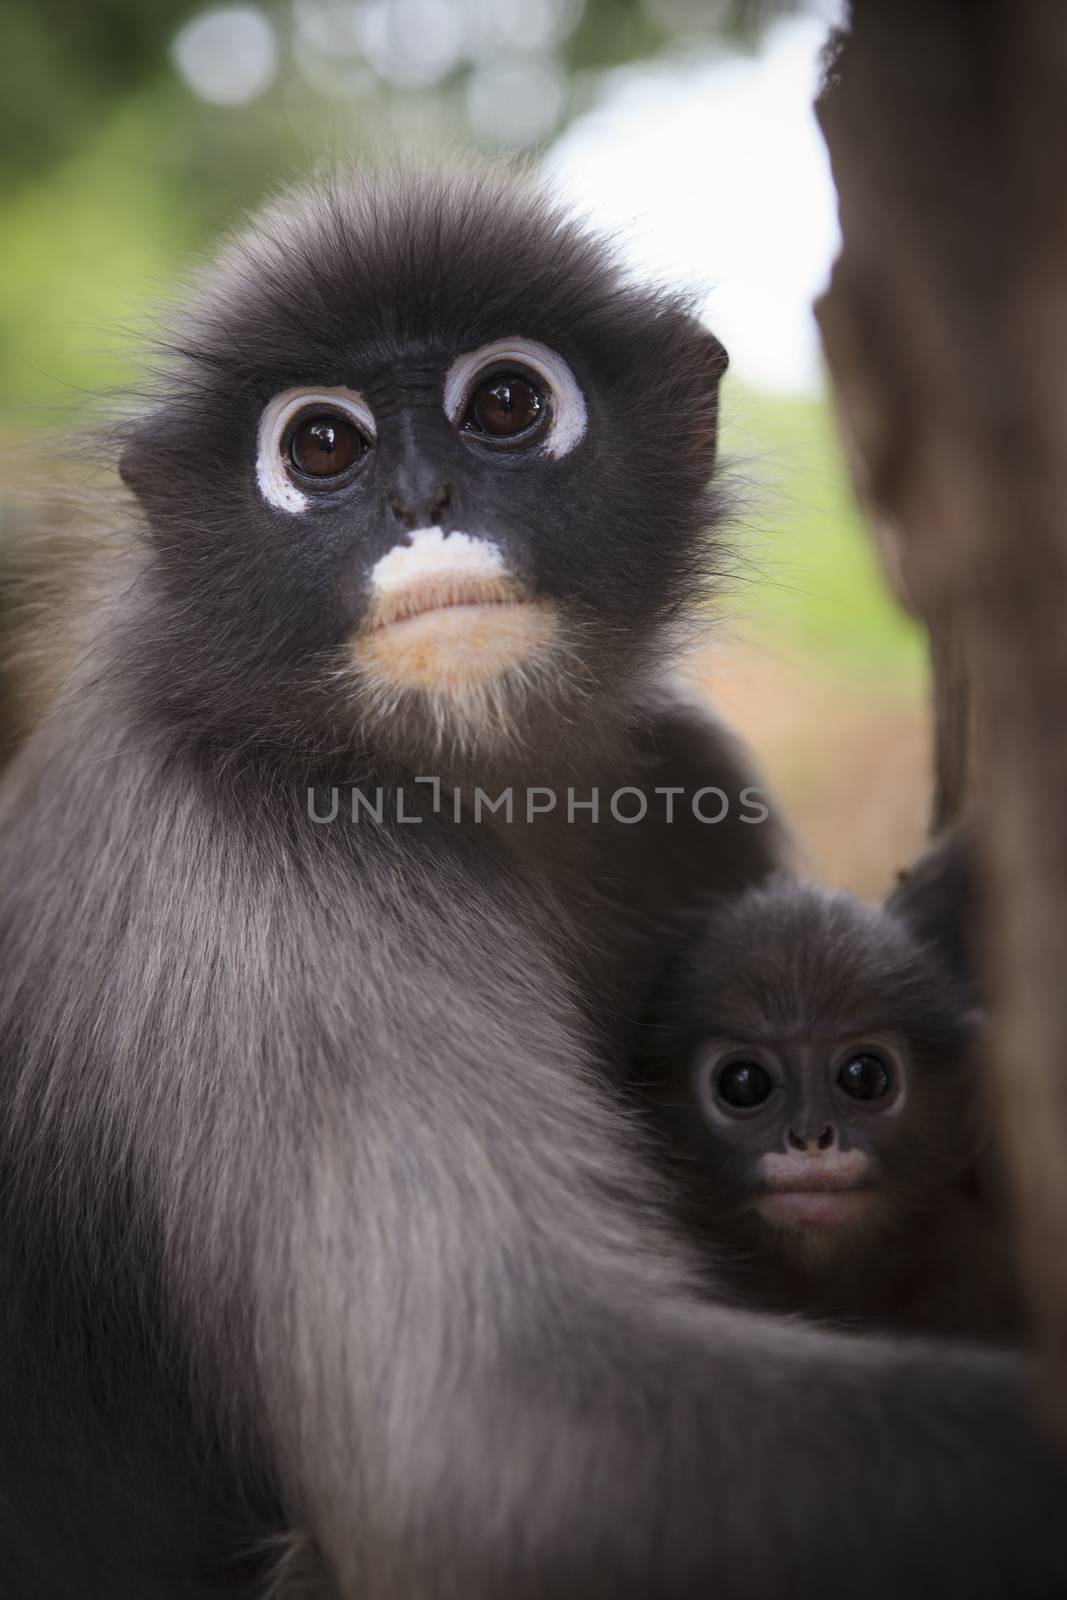 close up mother face of dusky leaf monkey and new kid in warming hug